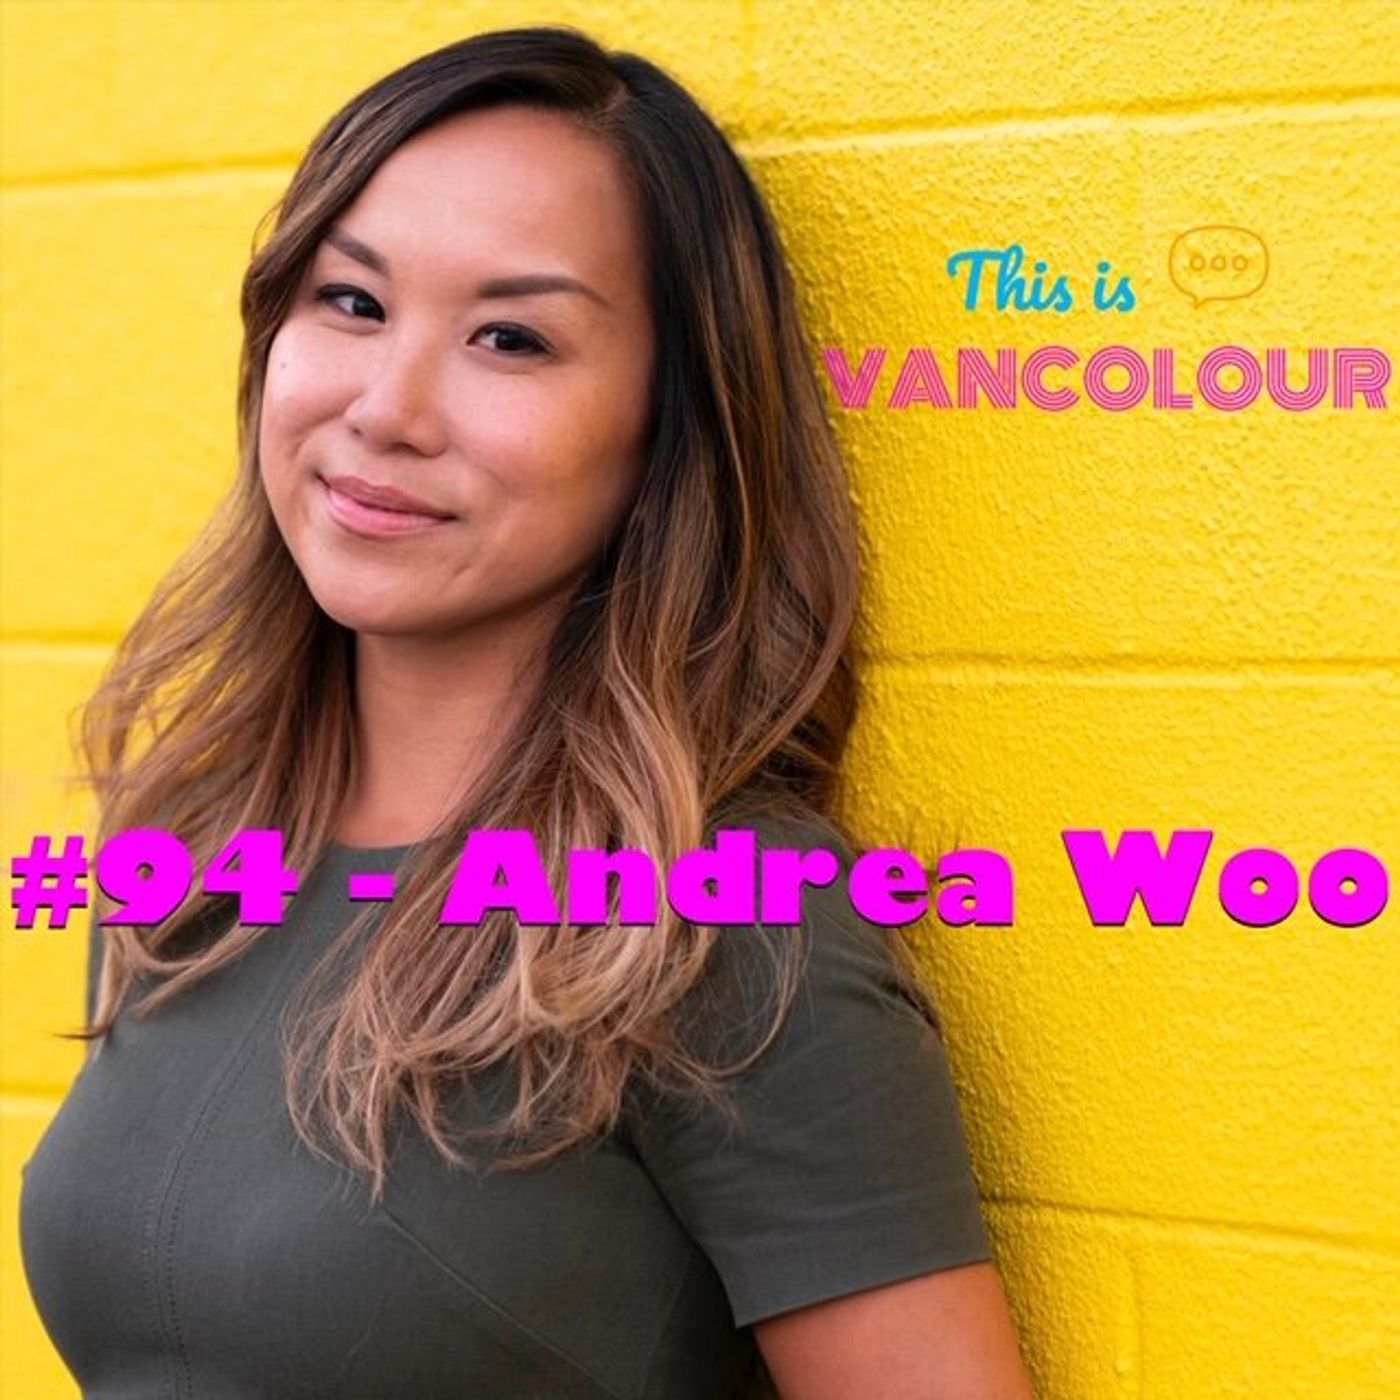 #94 - Andrea Woo (The Globe and Mail)